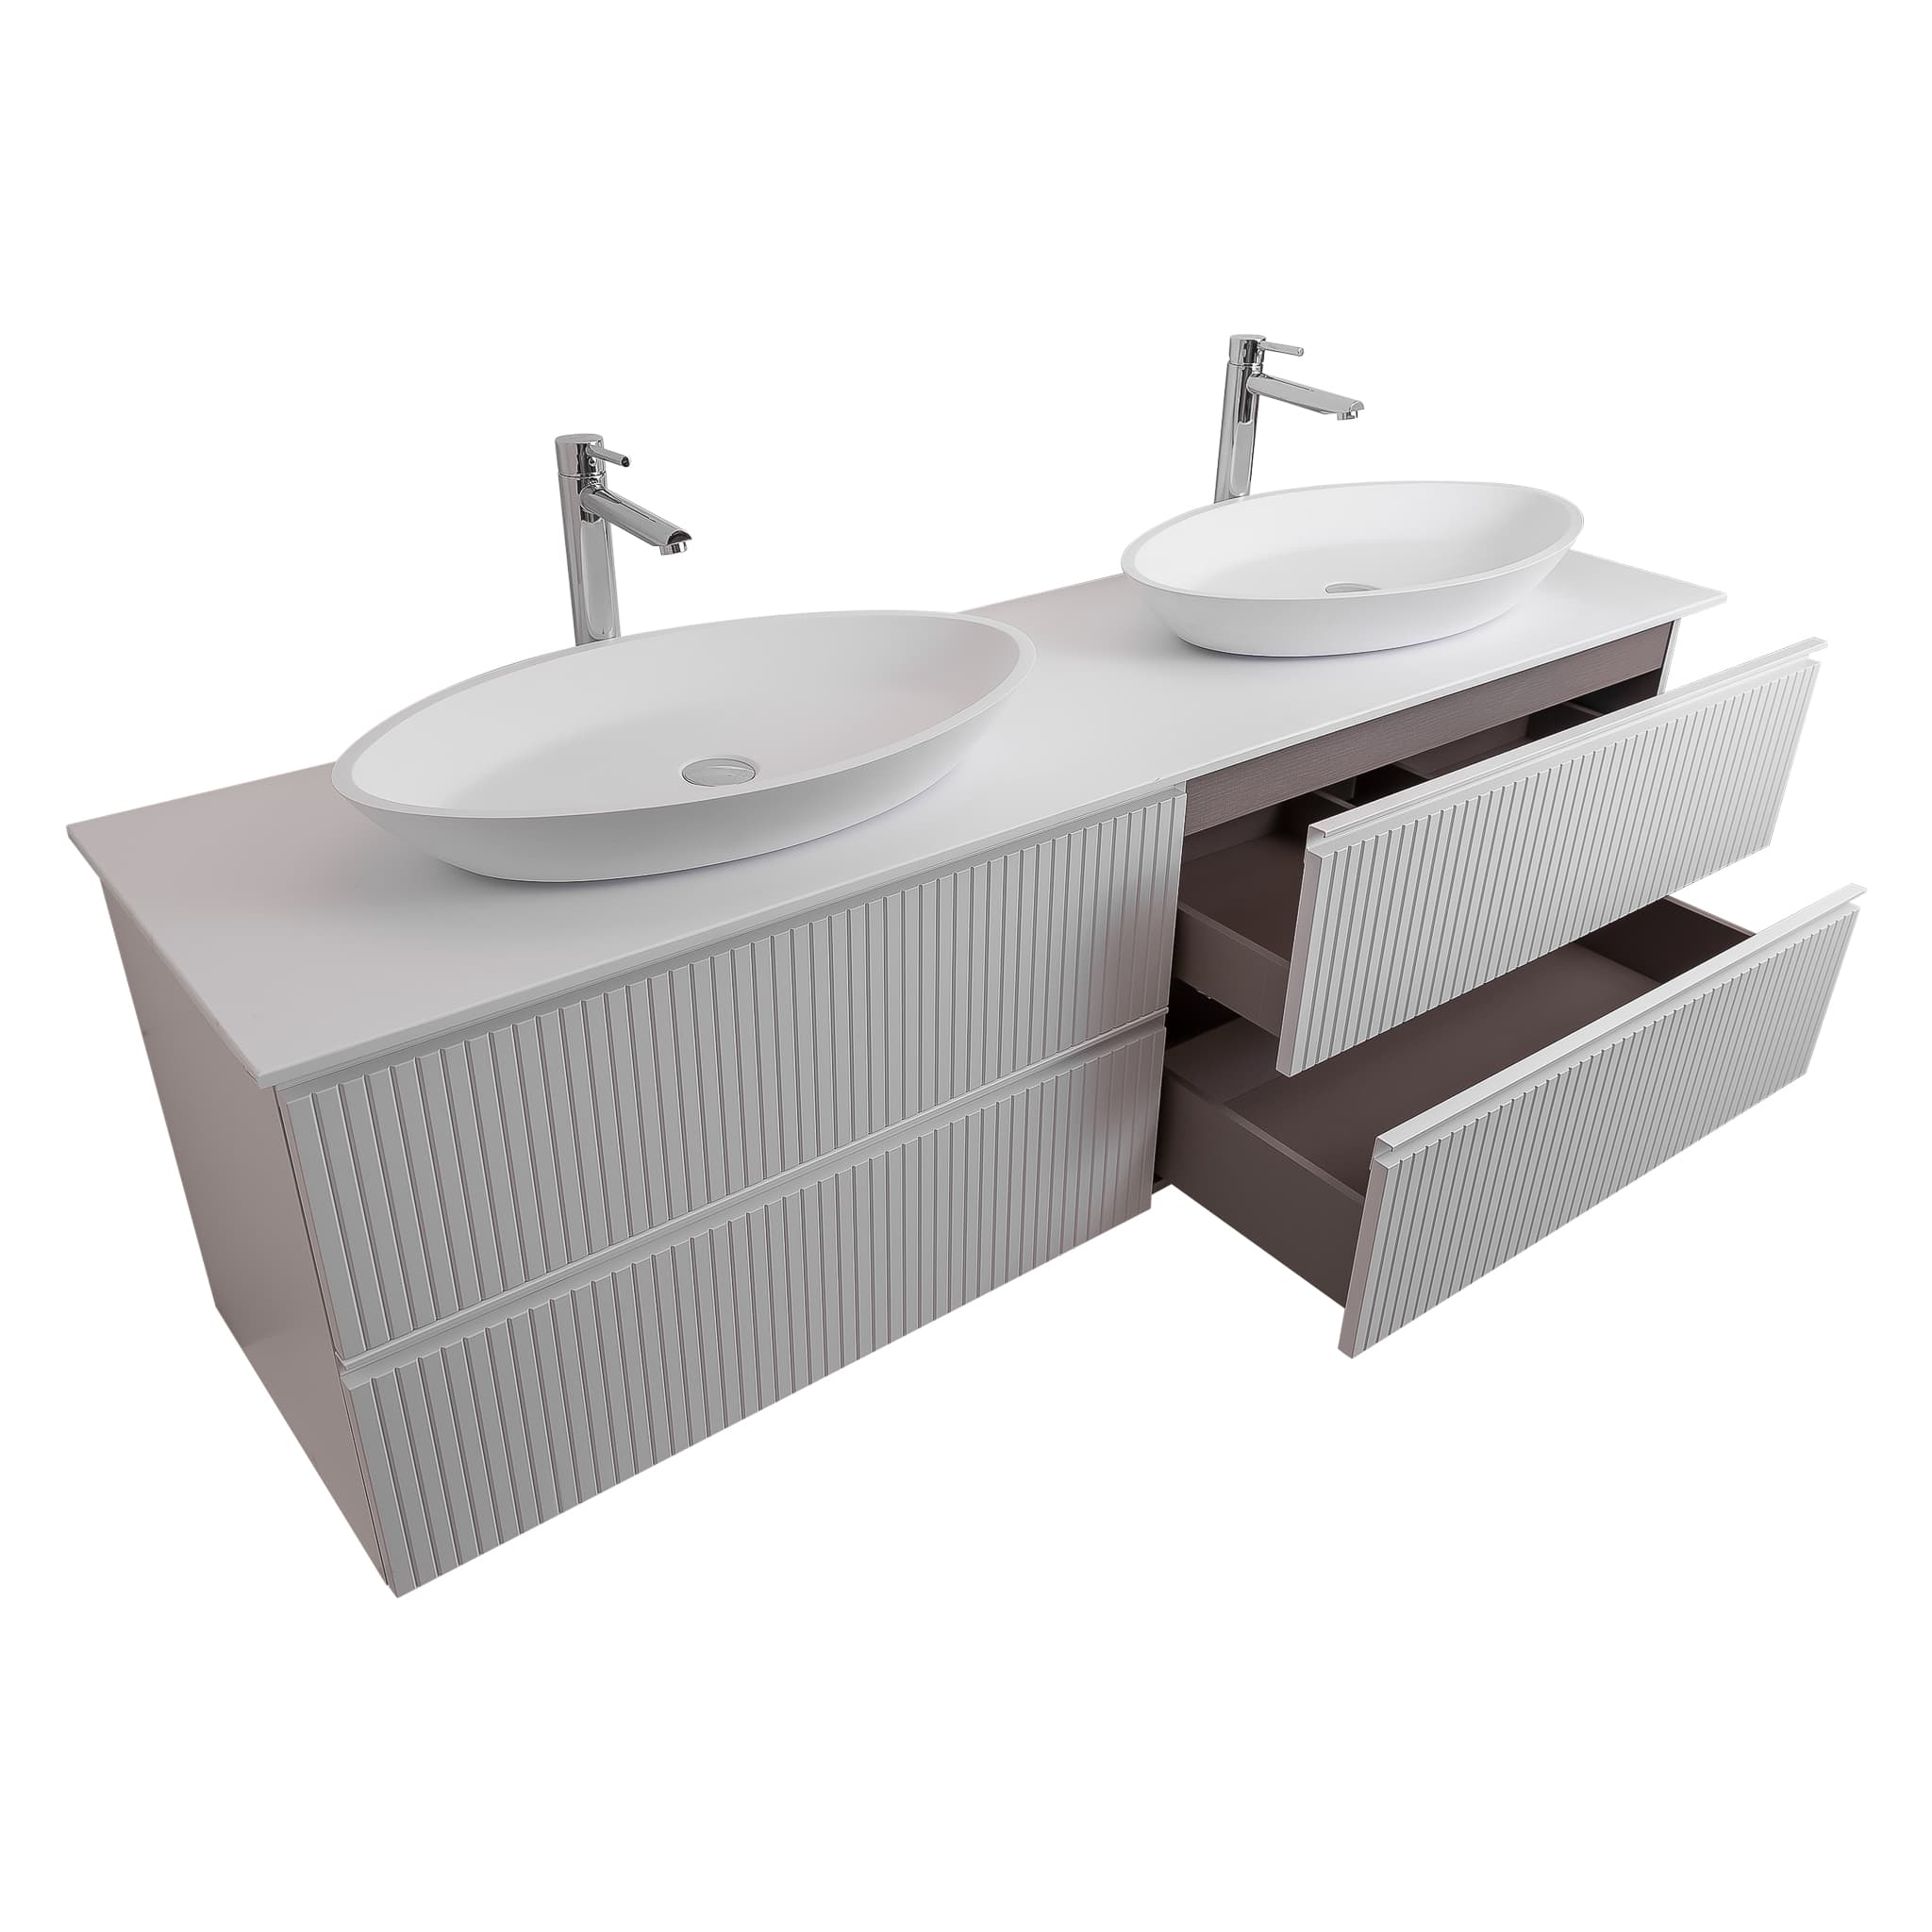 Ares 63 Matte White Cabinet, Solid Surface Flat White Counter And Two Oval Solid Surface White Basin 1305, Wall Mounted Modern Vanity Set